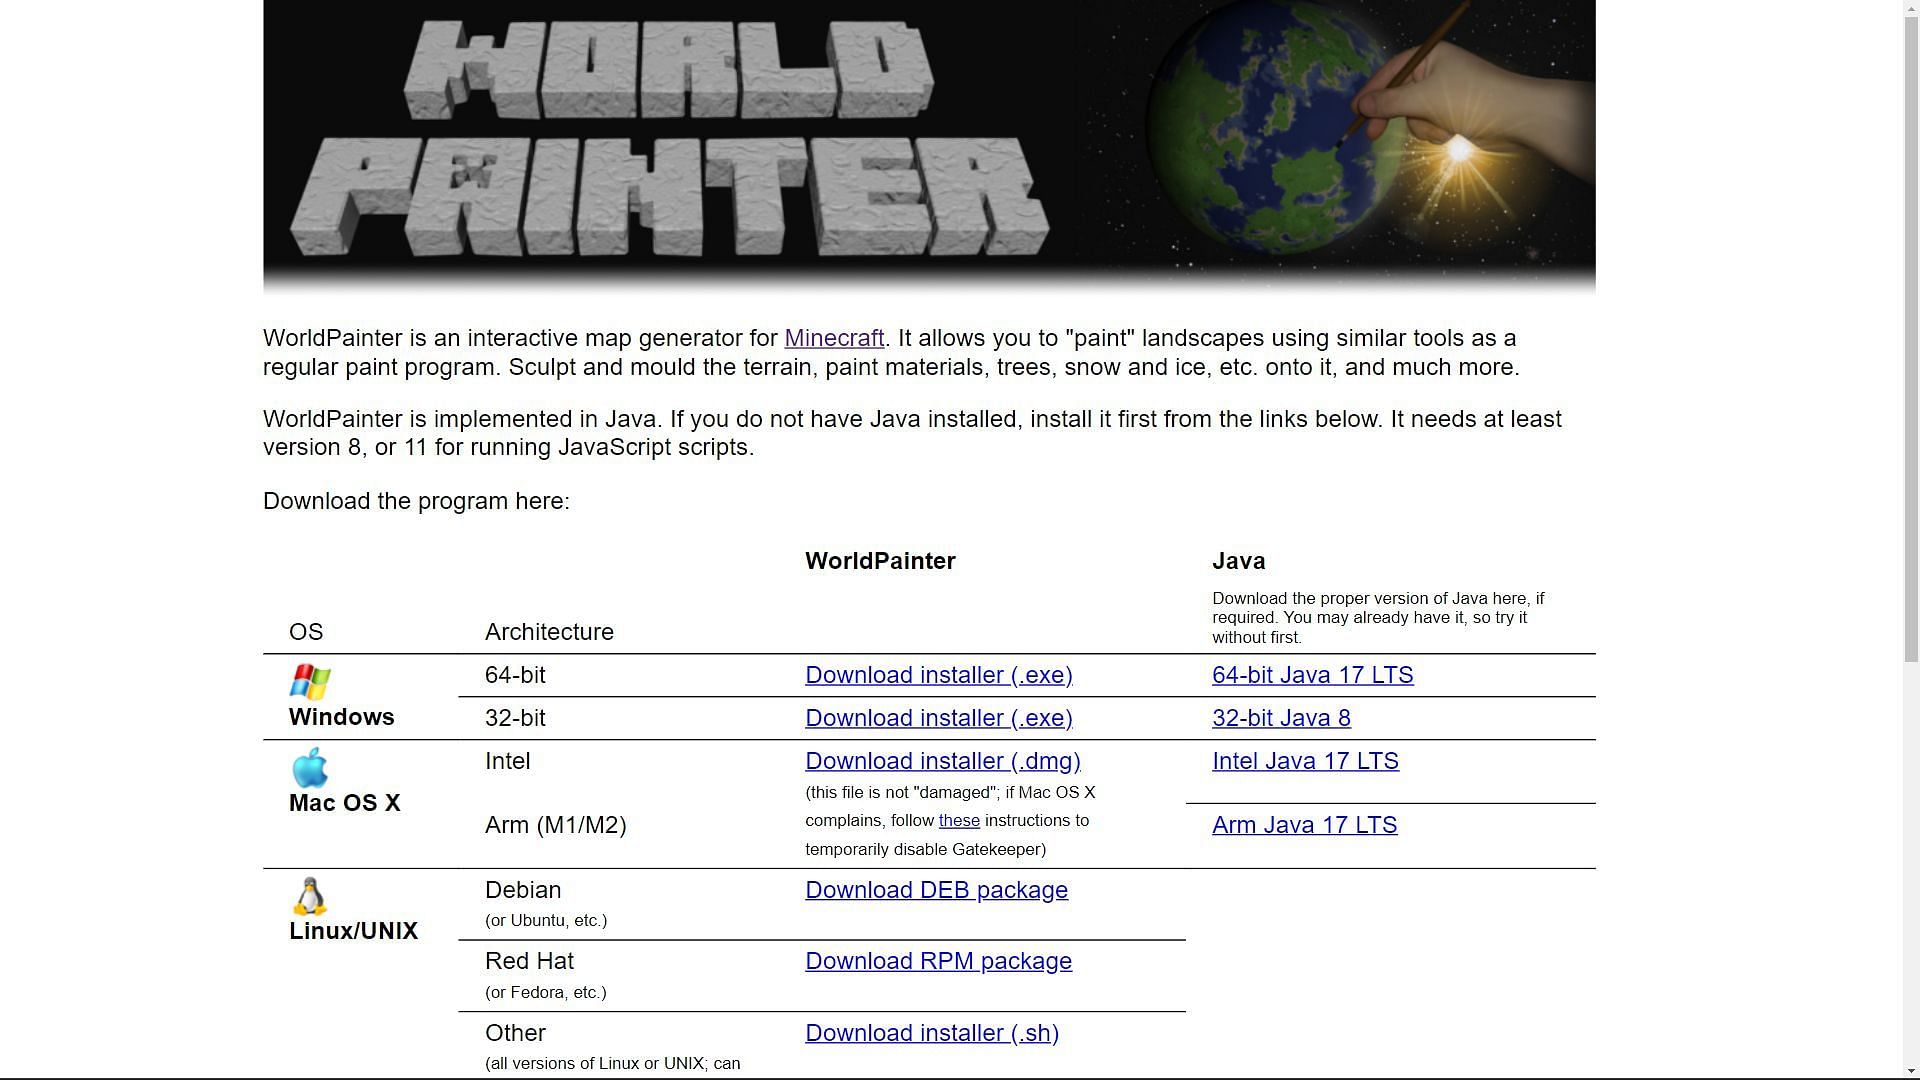 WorldPainter for Minecraft official website with all the download links for different platforms (Image via Sportskeeda)